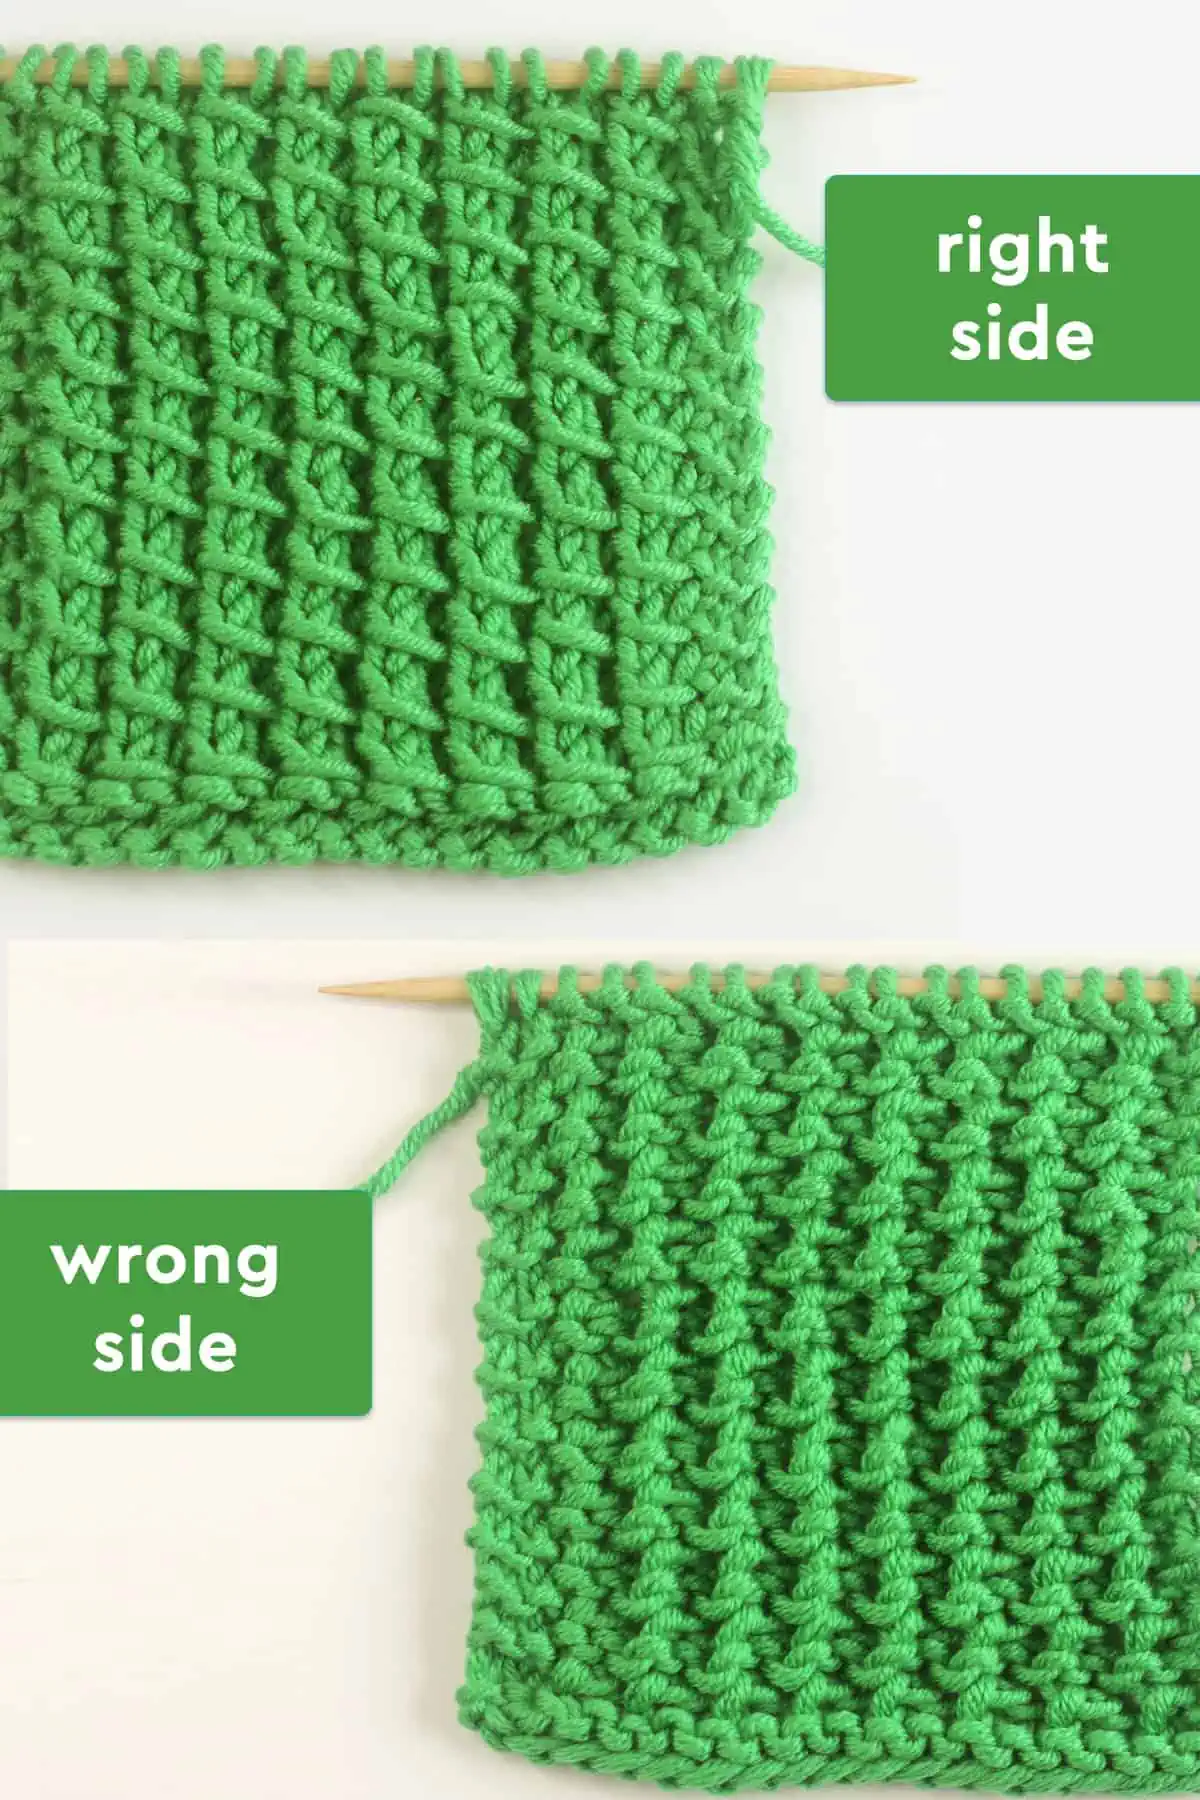 Right and wrong sides of the Bamboo Stitch in green colored yarn on knitting needle.